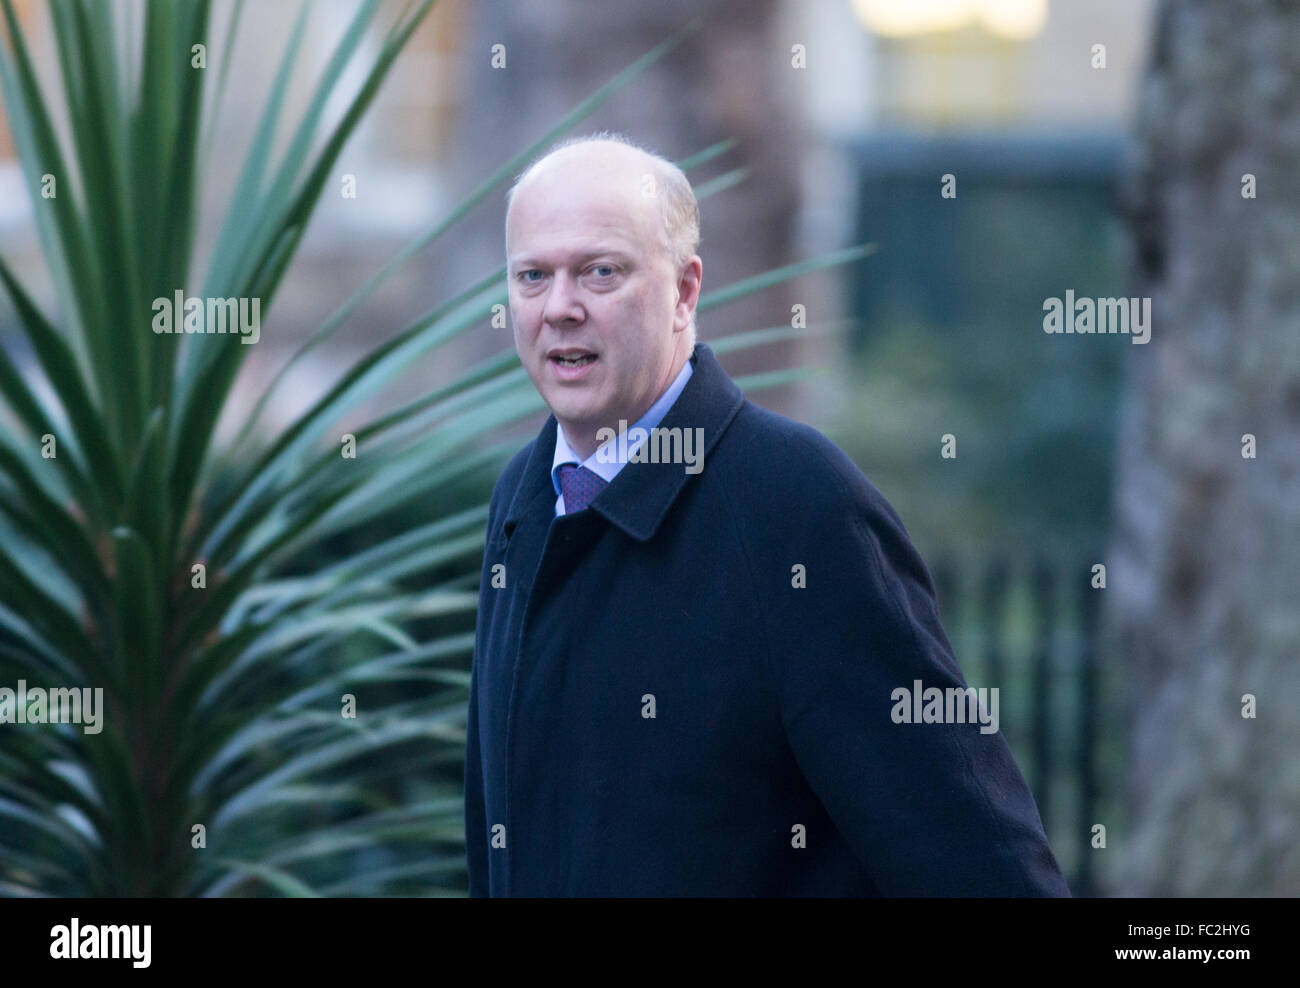 Chris Grayling,Leader of the House of Commons and the Lord President of the Council, at 10 Downing street for a cabinet meeting Stock Photo